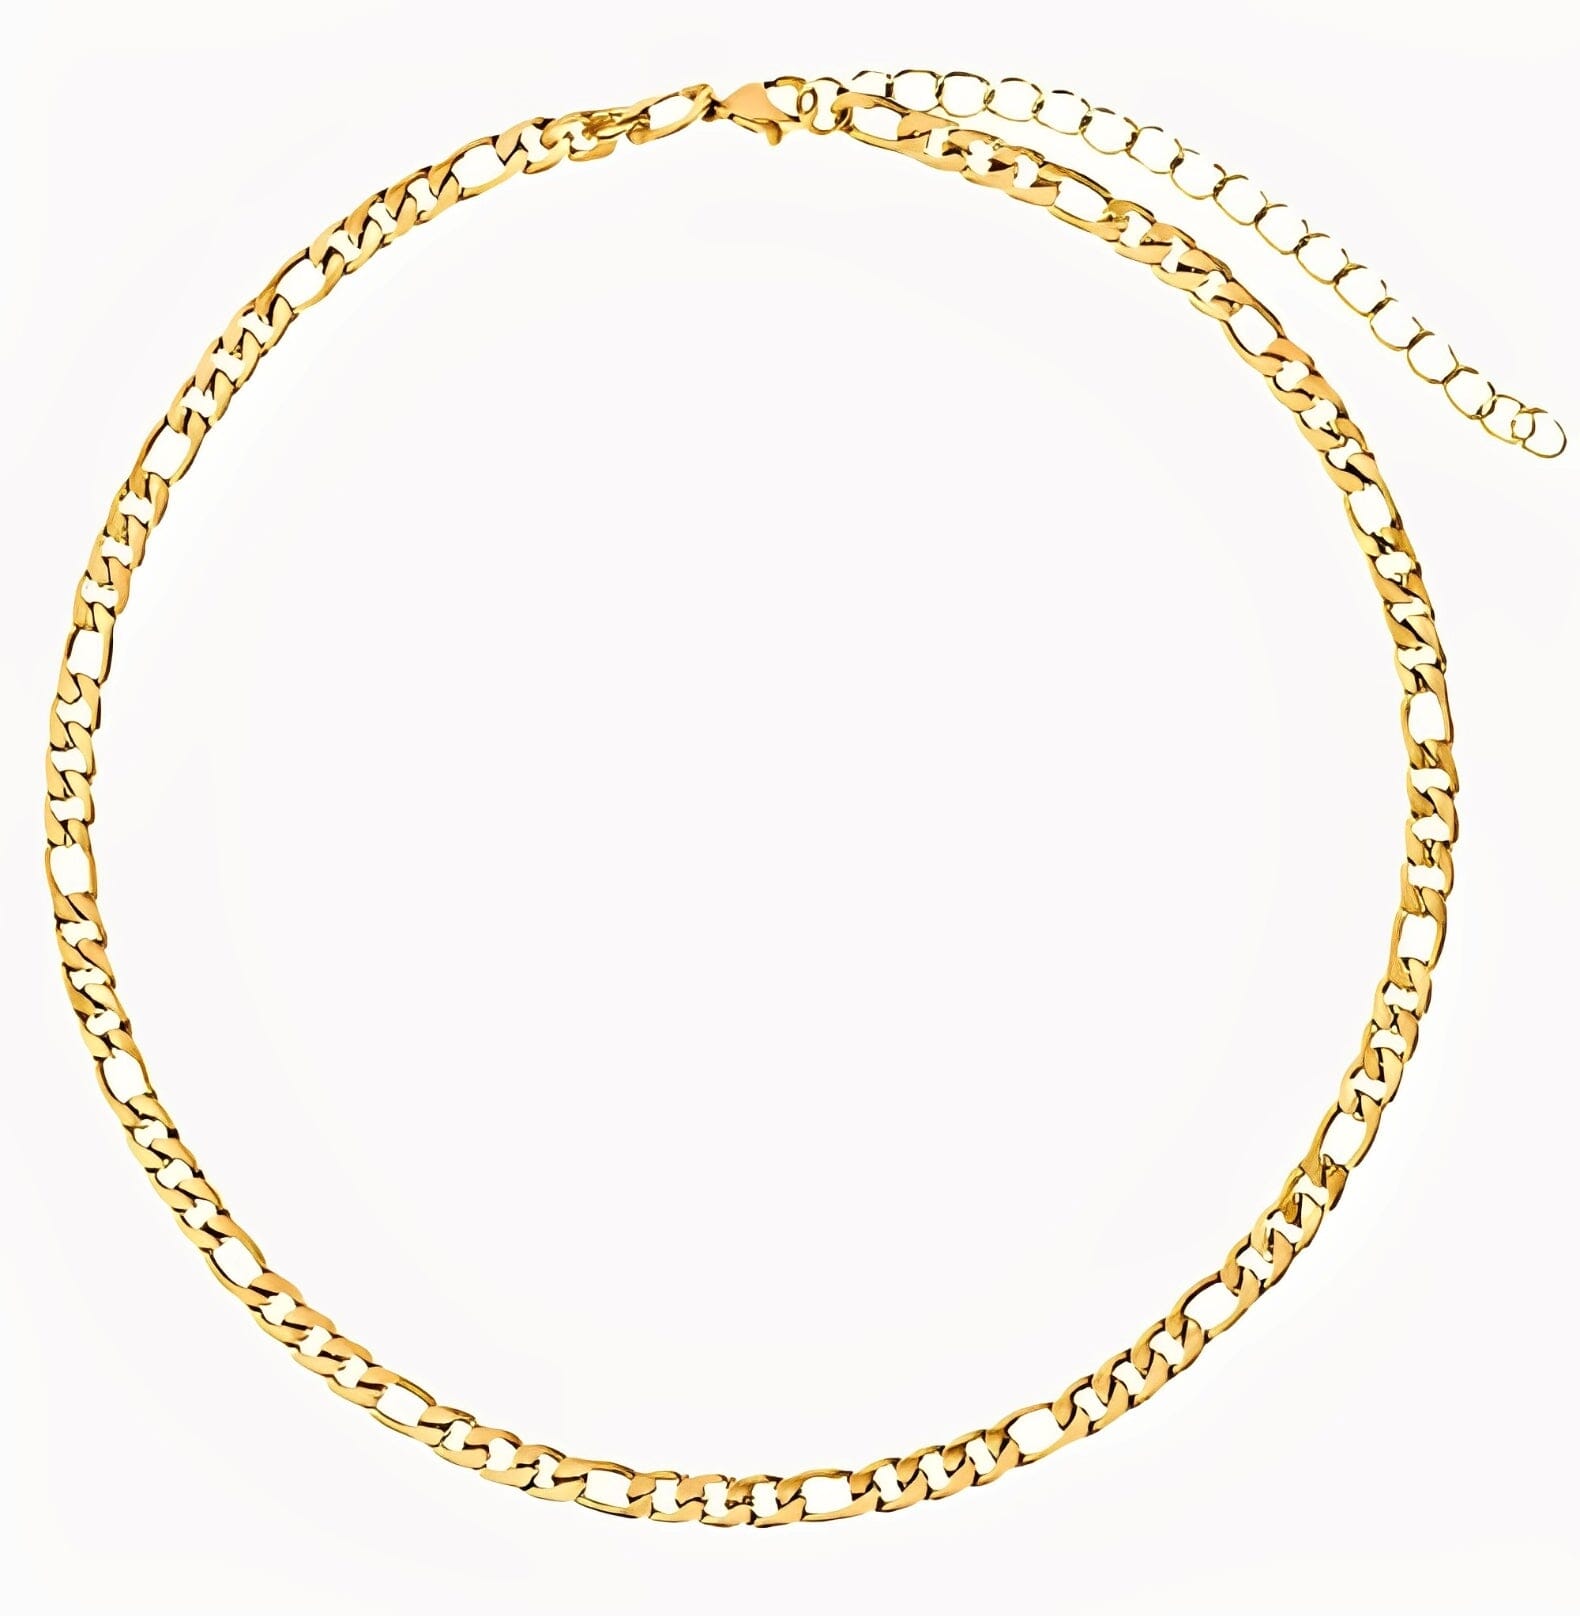 CLASSIC CHAIN NECKLACE neck Yubama Jewelry Online Store - The Elegant Designs of Gold and Silver ! 